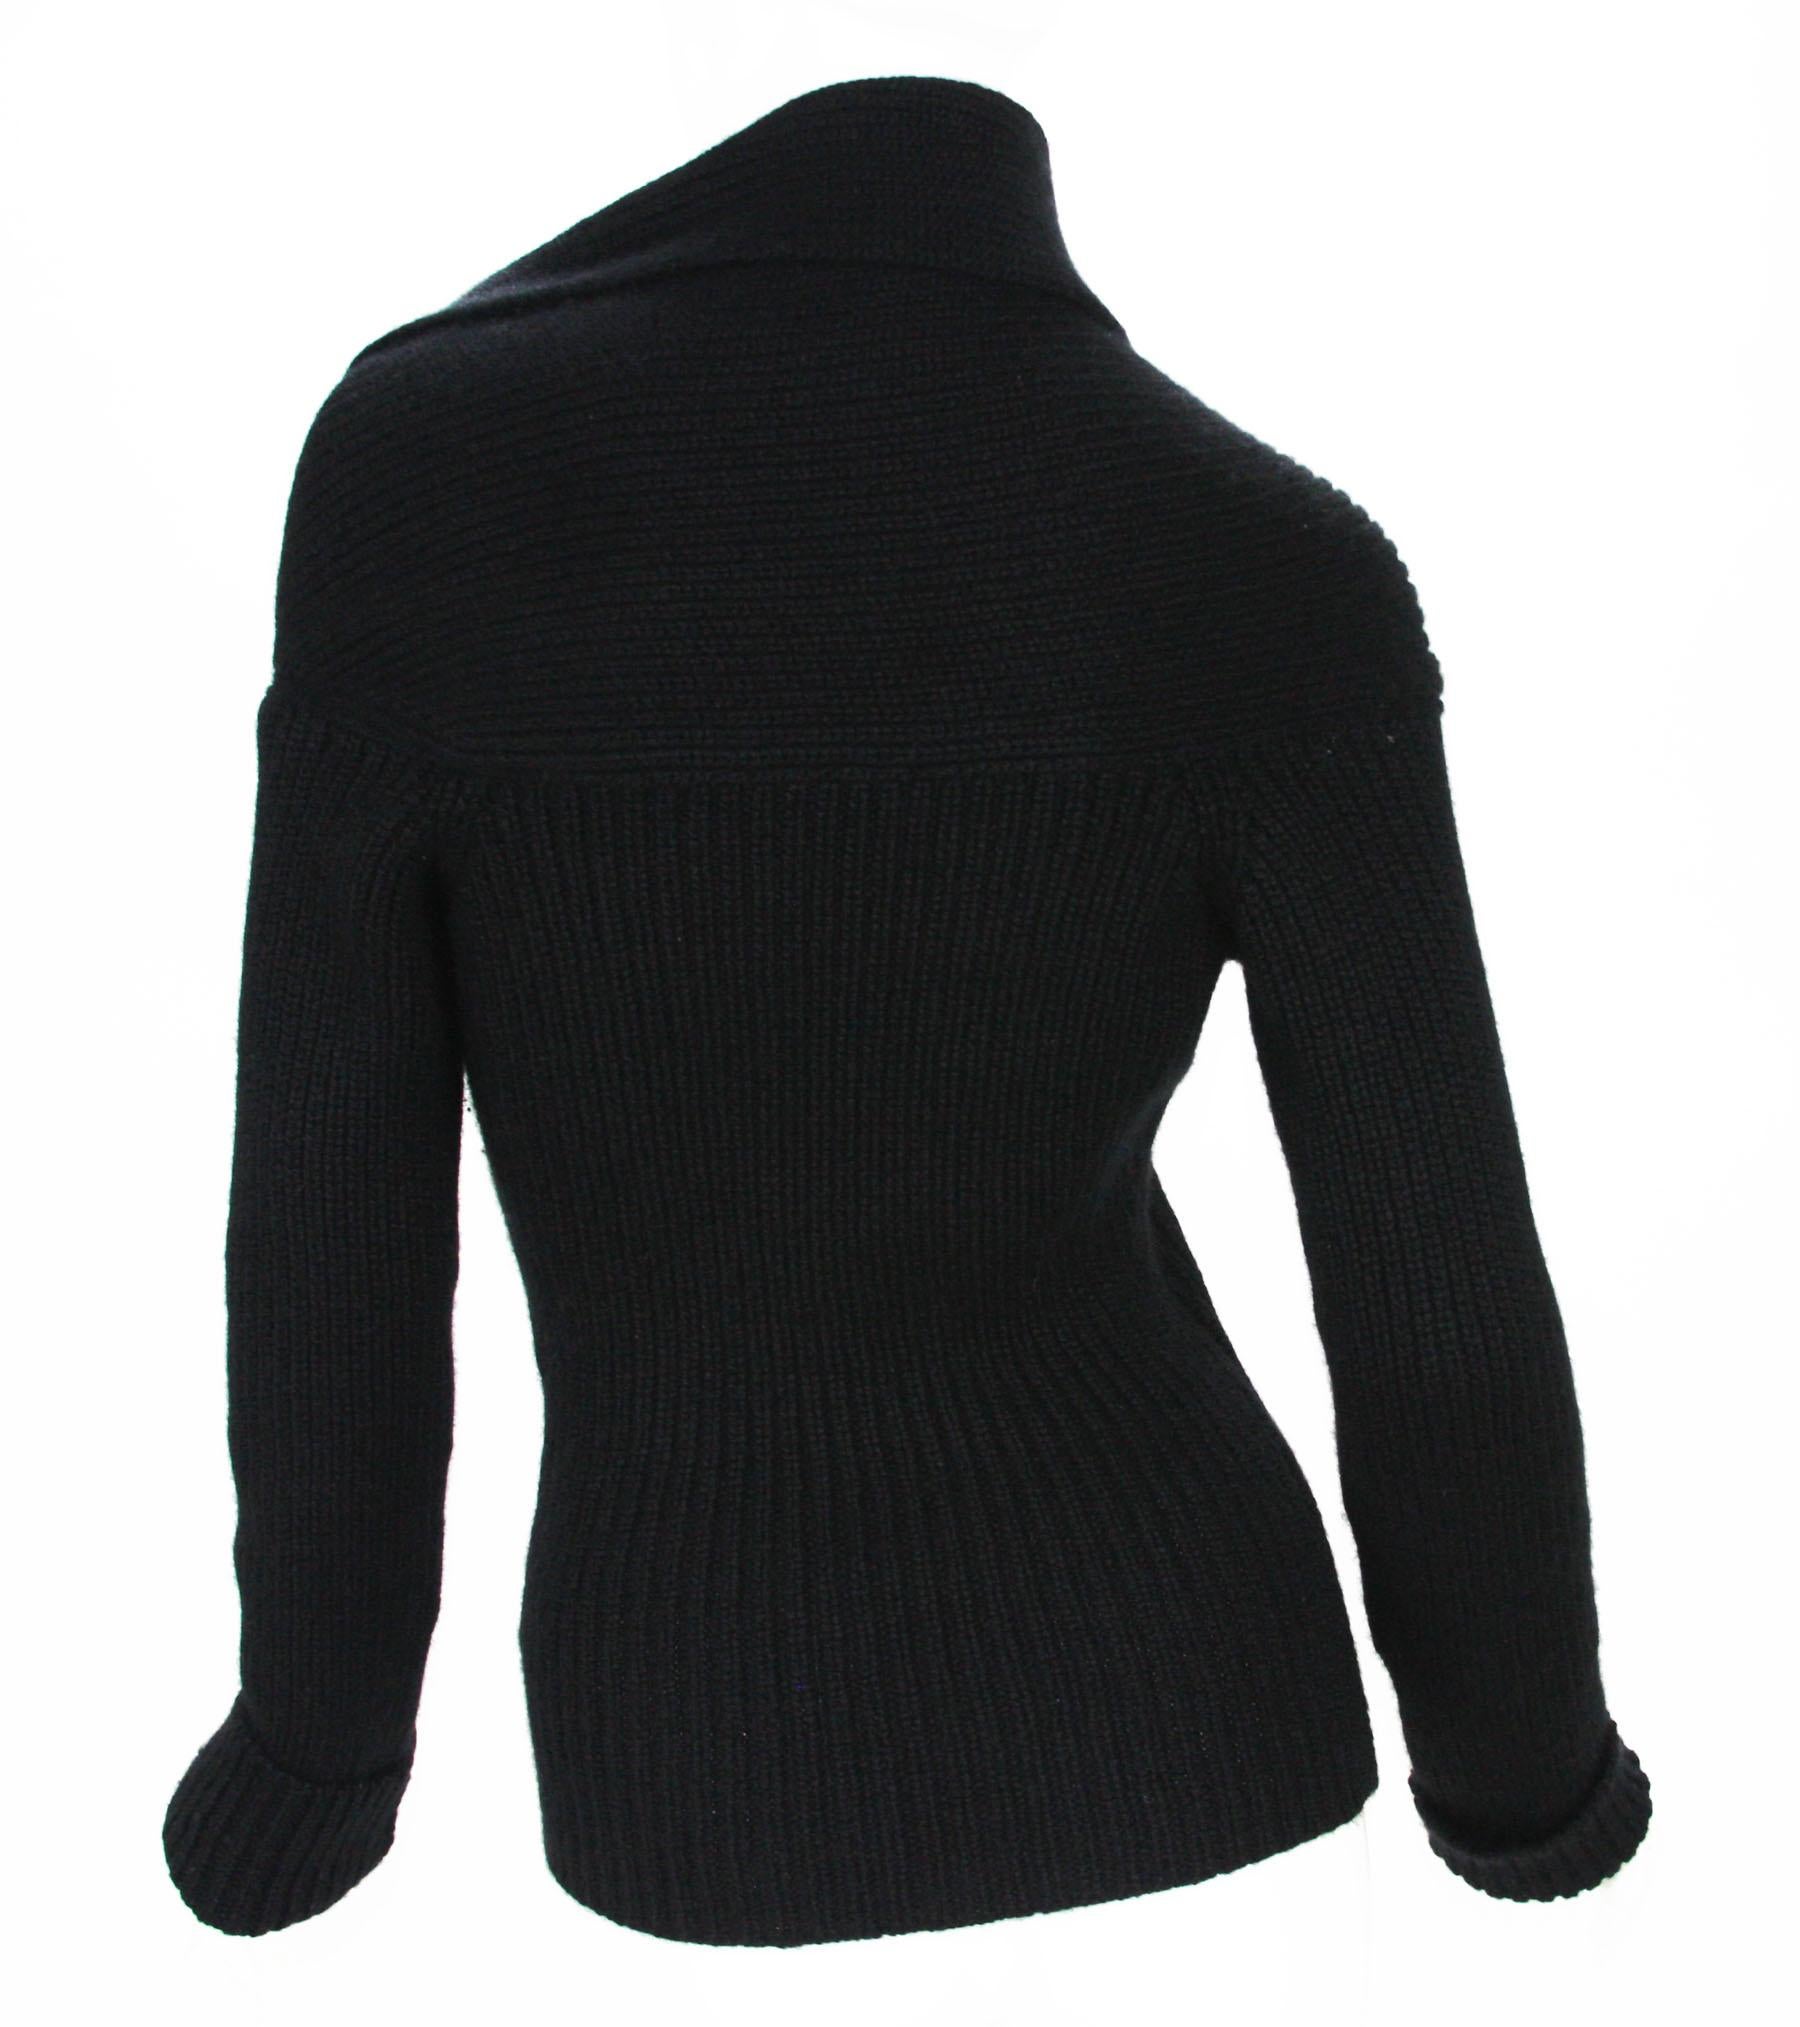 Black Tom Ford for Gucci F/W 2003 Collection 100% Cashmere Sweater size Small For Sale